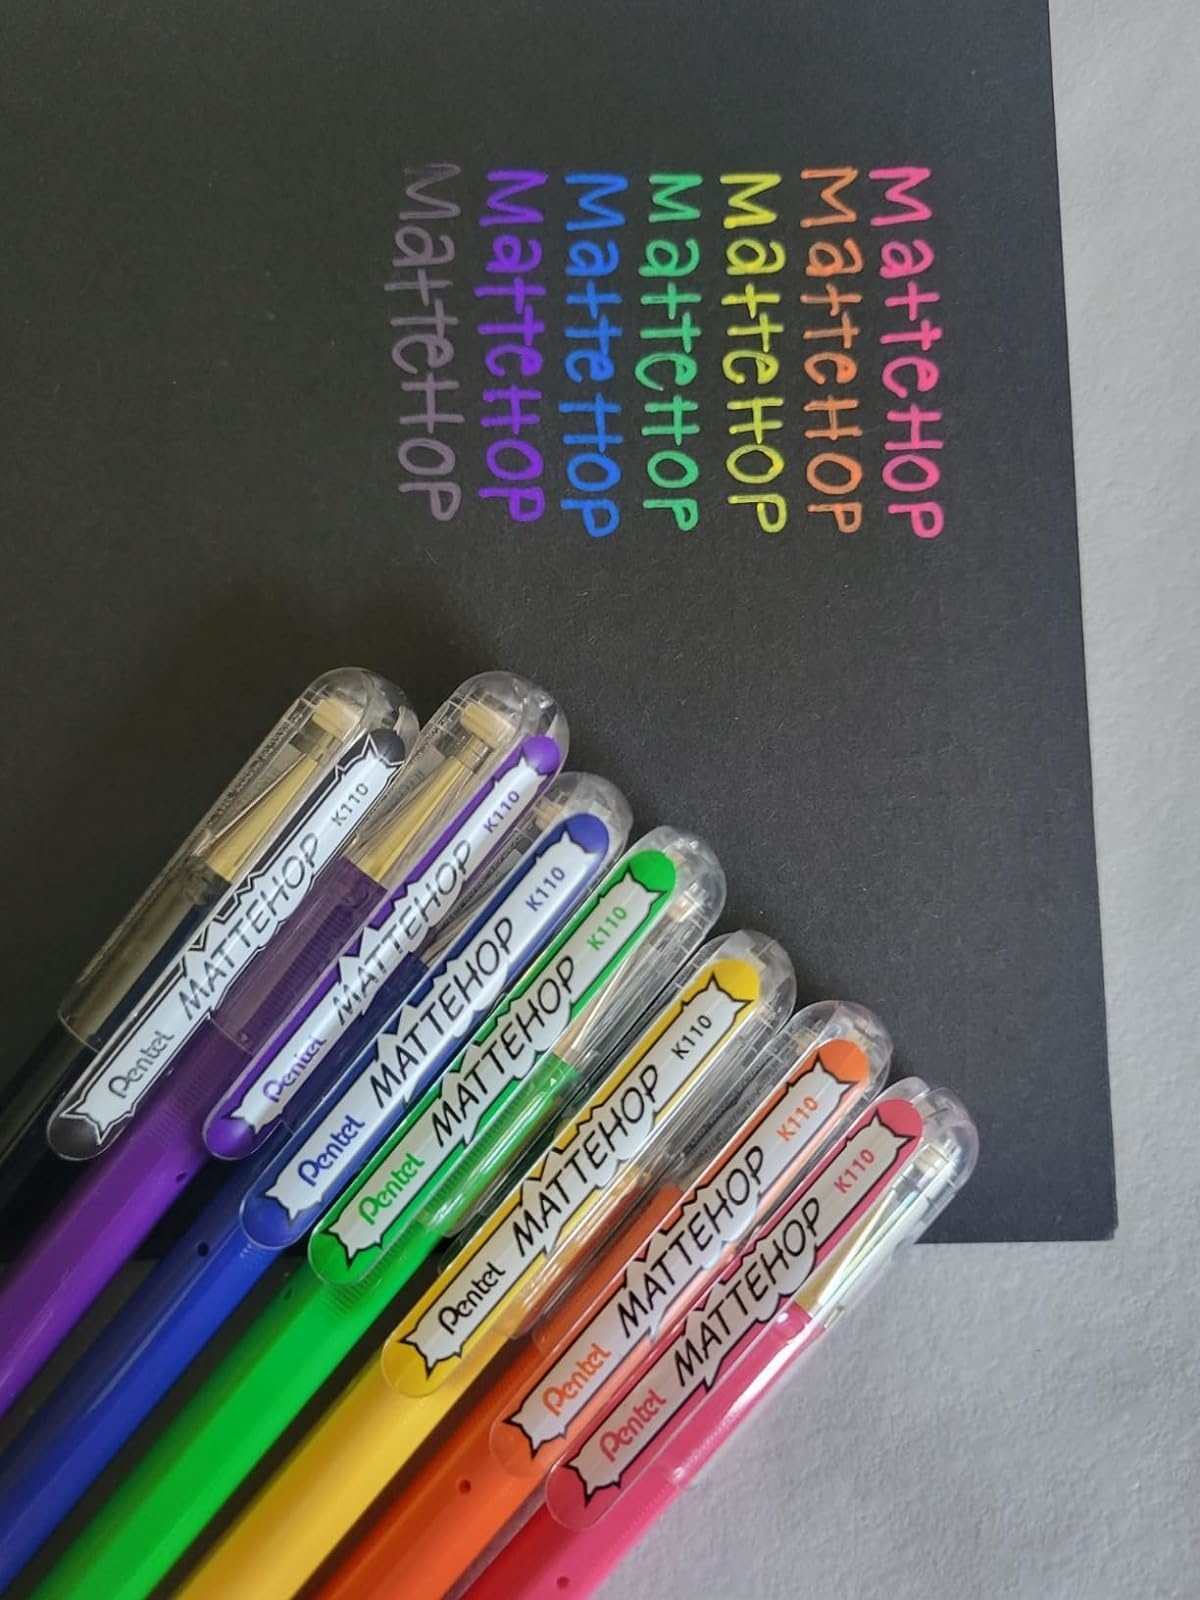 A set of vibrant MATTEHOP pens arrayed on a surface with their brand names visible